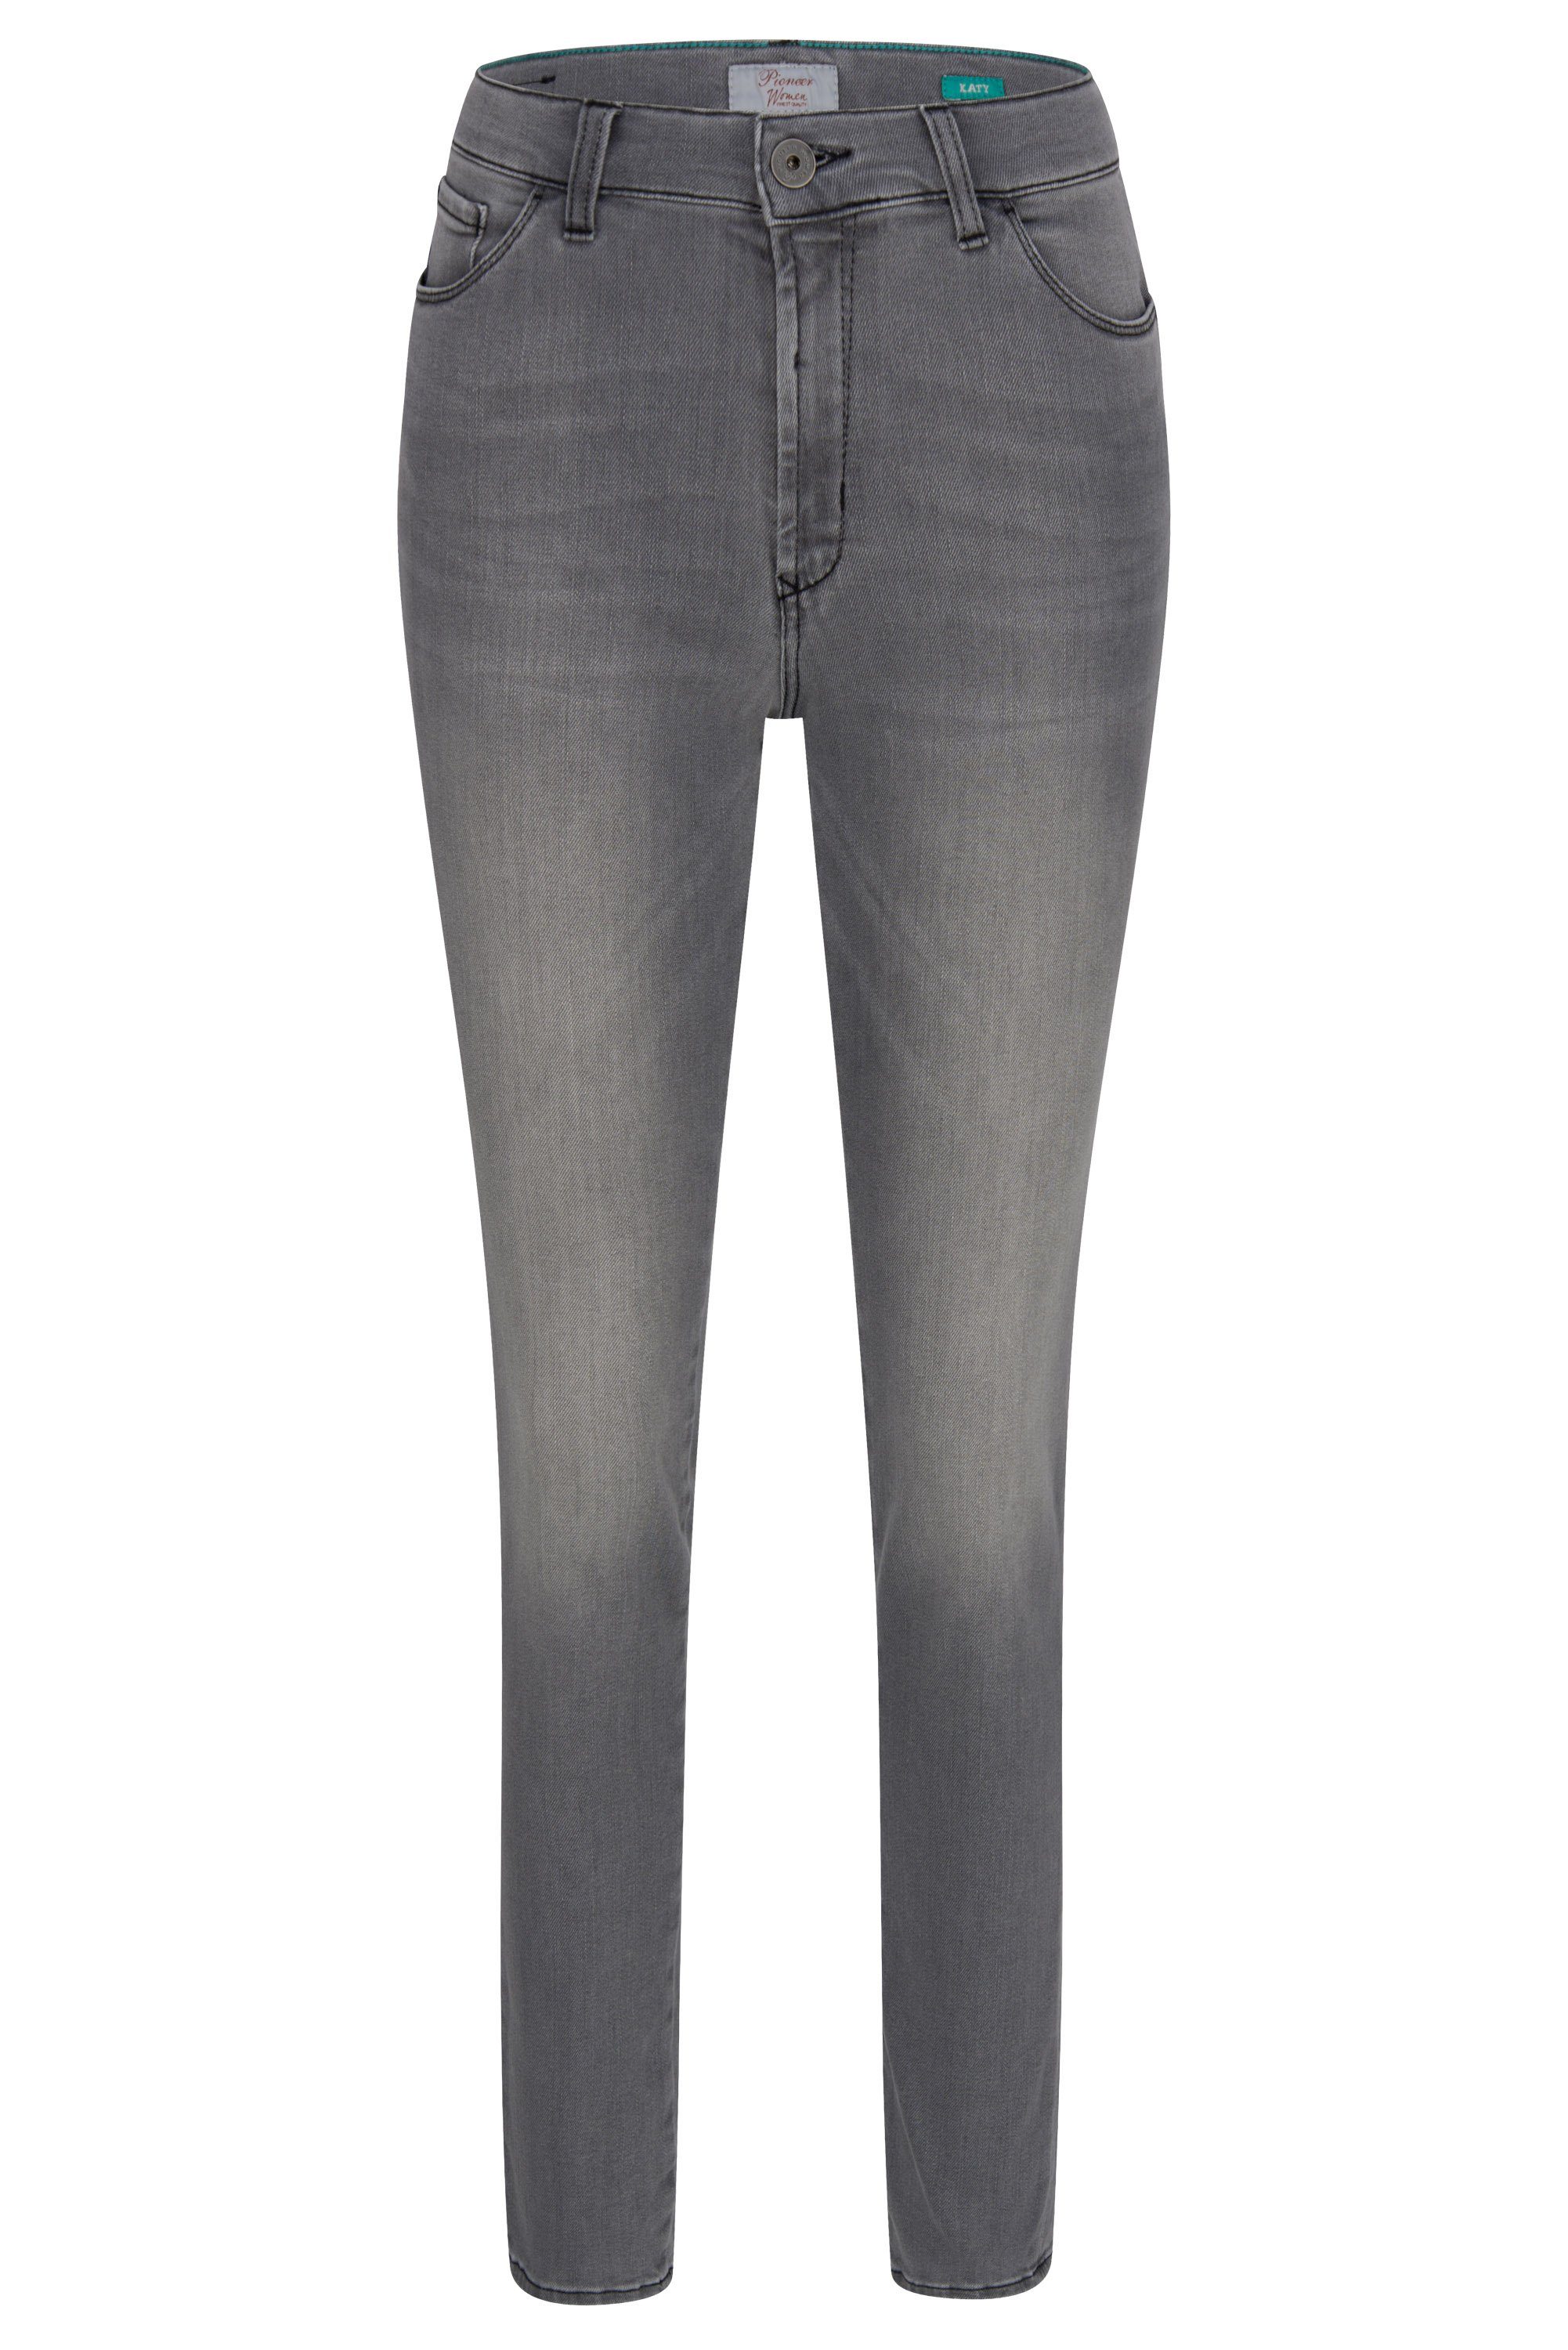 KATY - Stretch-Jeans buffies used PIONEER grey 3011 POWERSTRETCH Authentic Jeans Pioneer 5012.9834